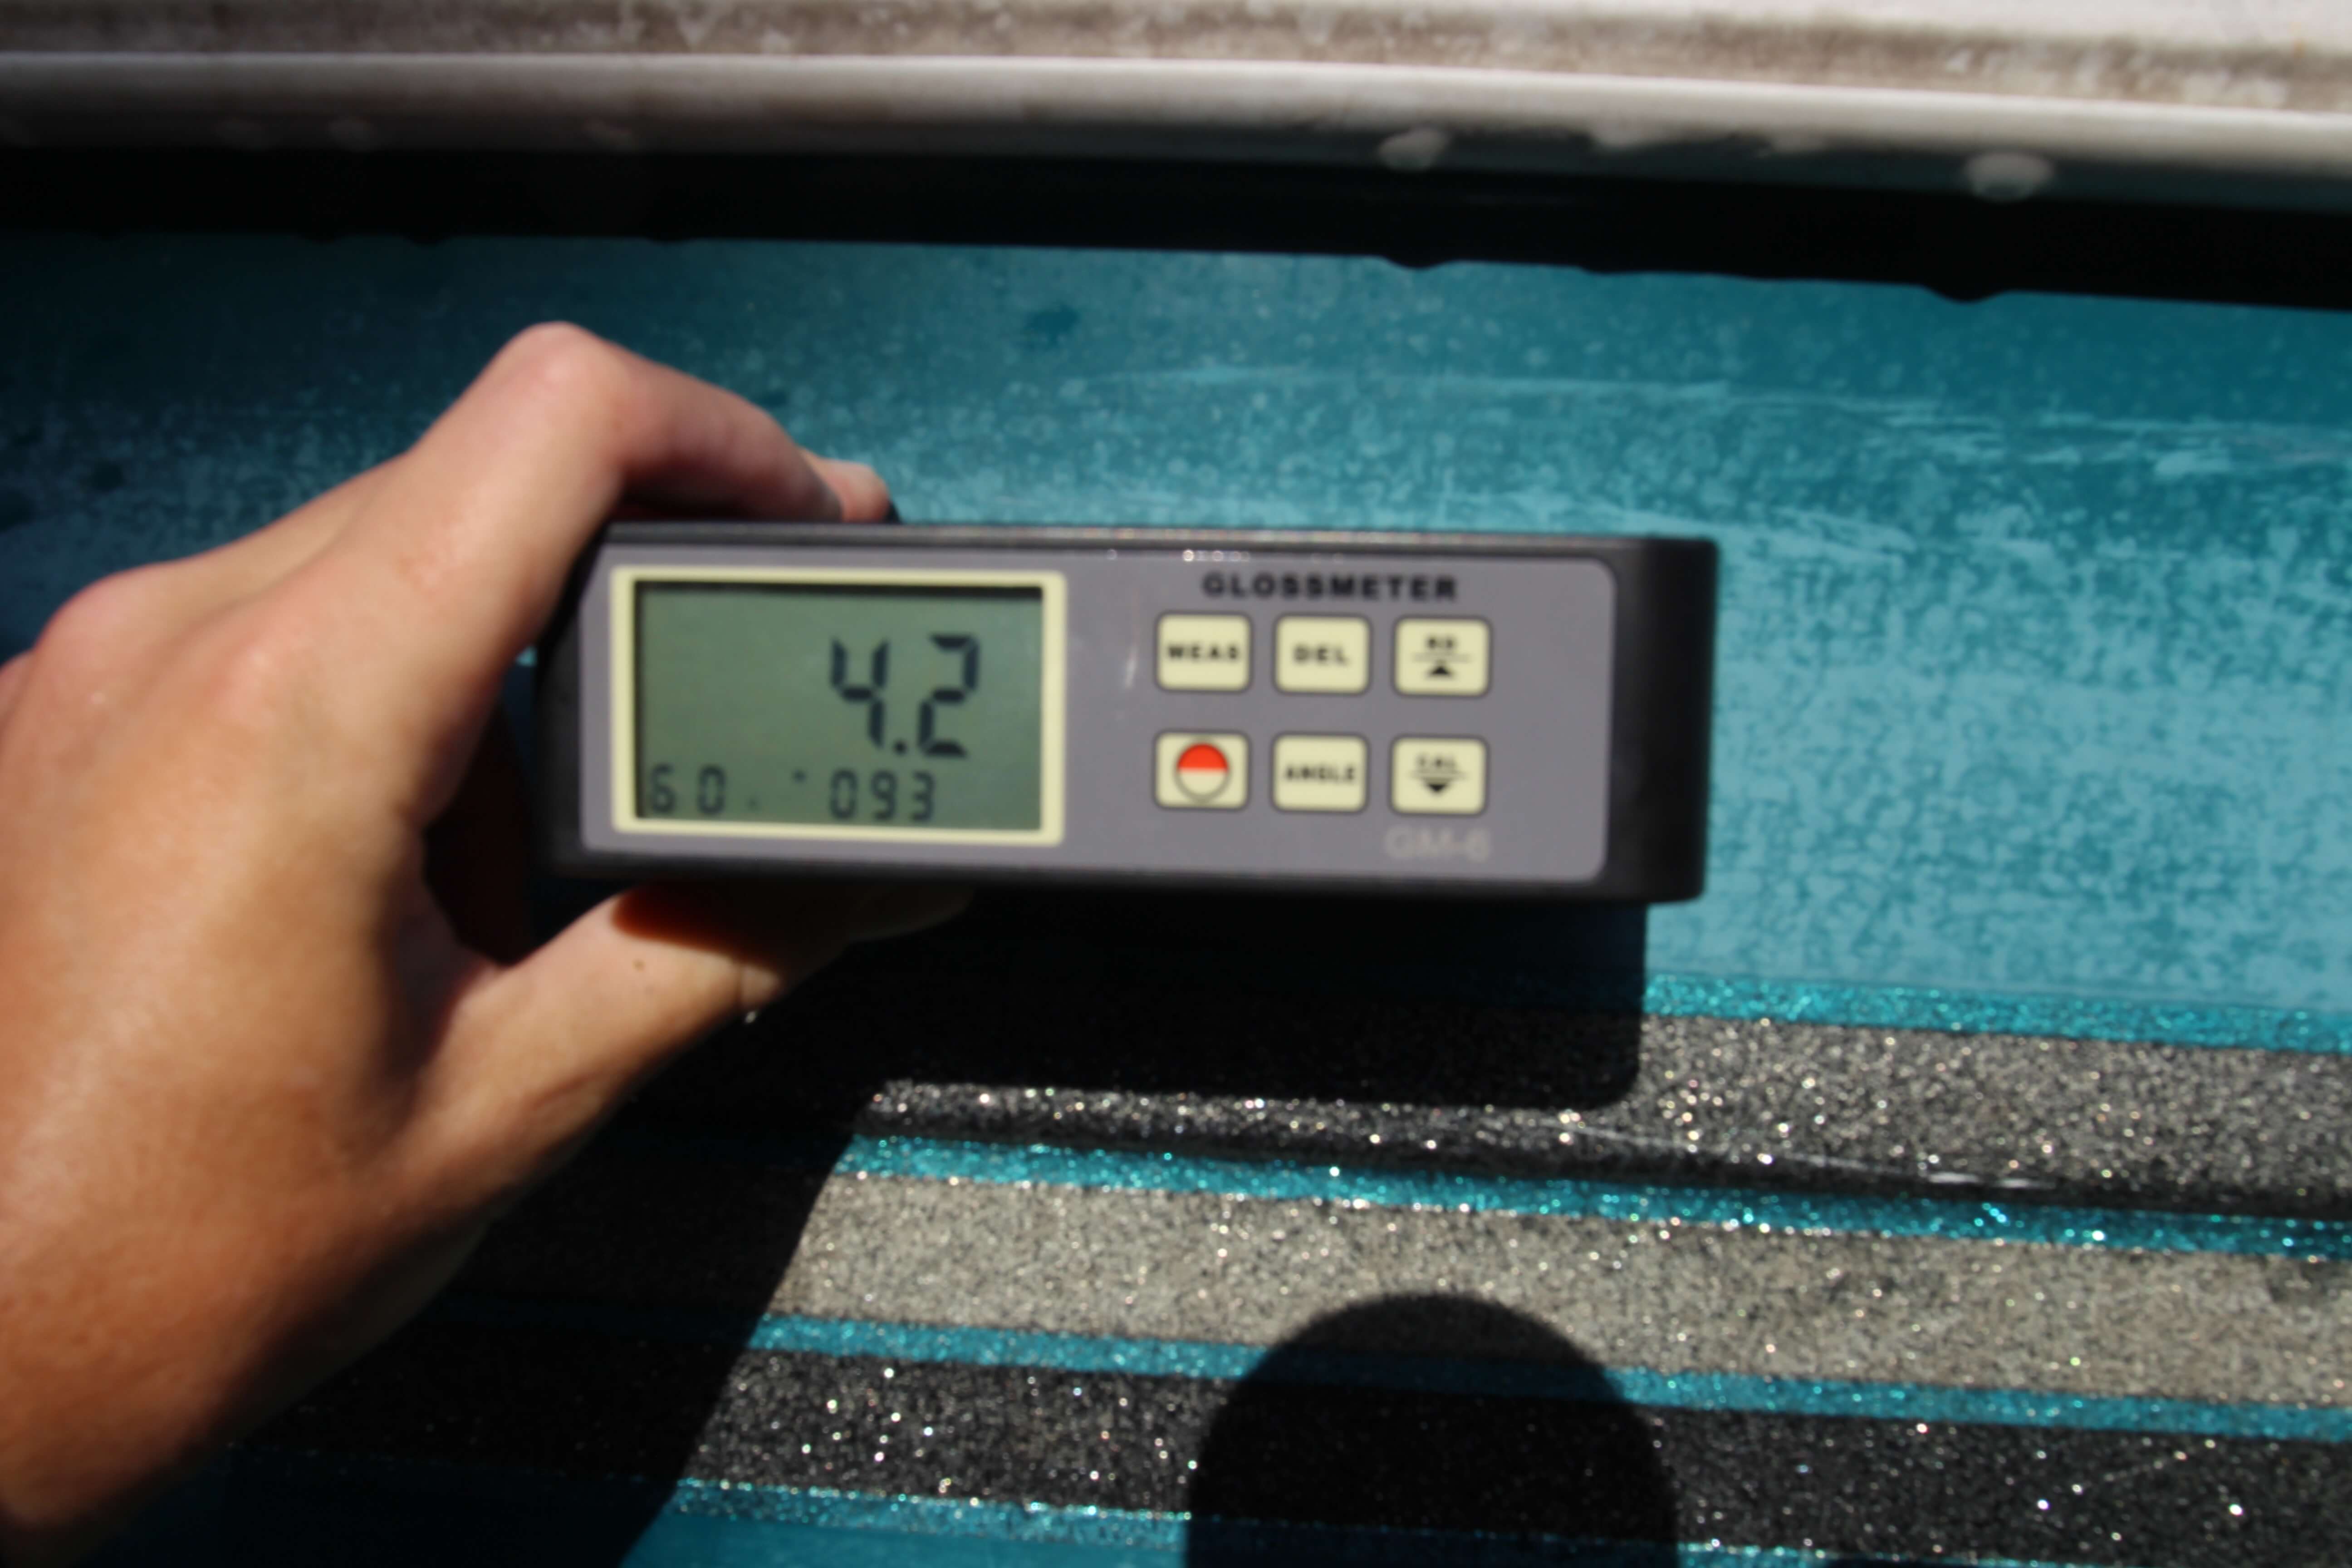 4.2 gloss meter reading on green hulled boat